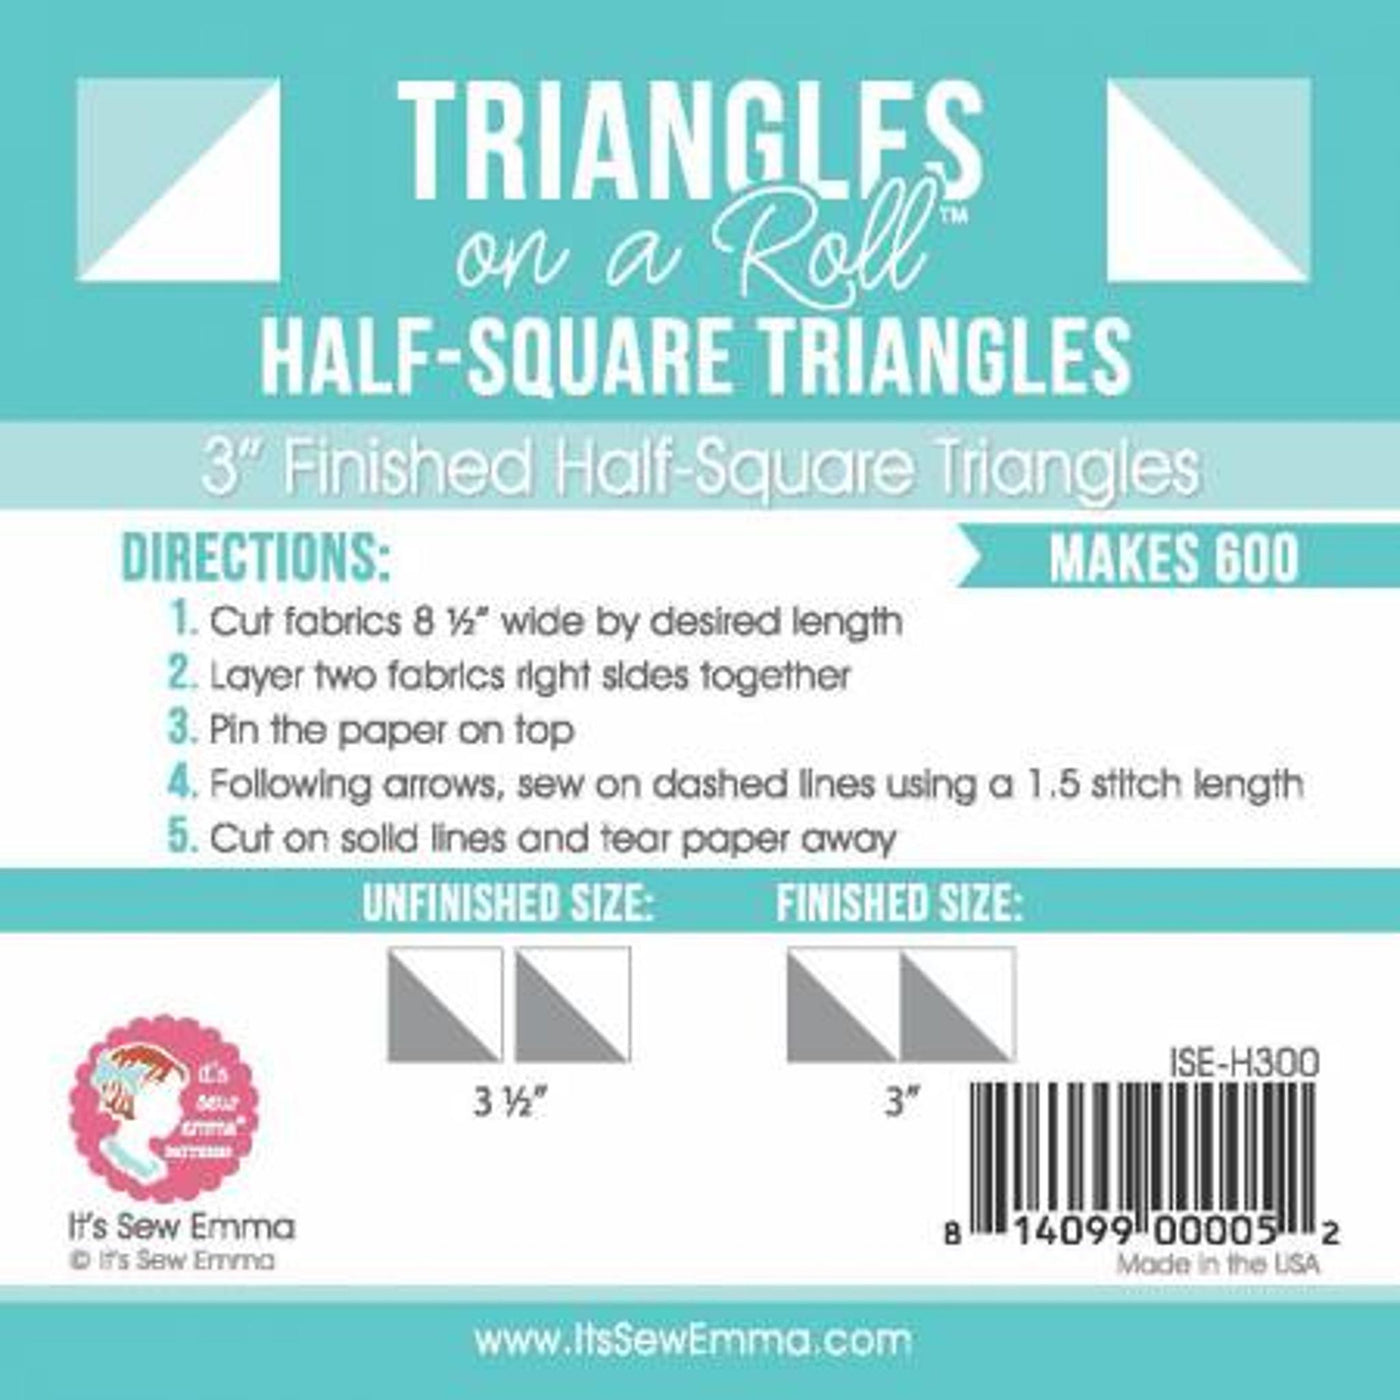 Triangles on a Roll - 1 1/2"" Half-square triangles